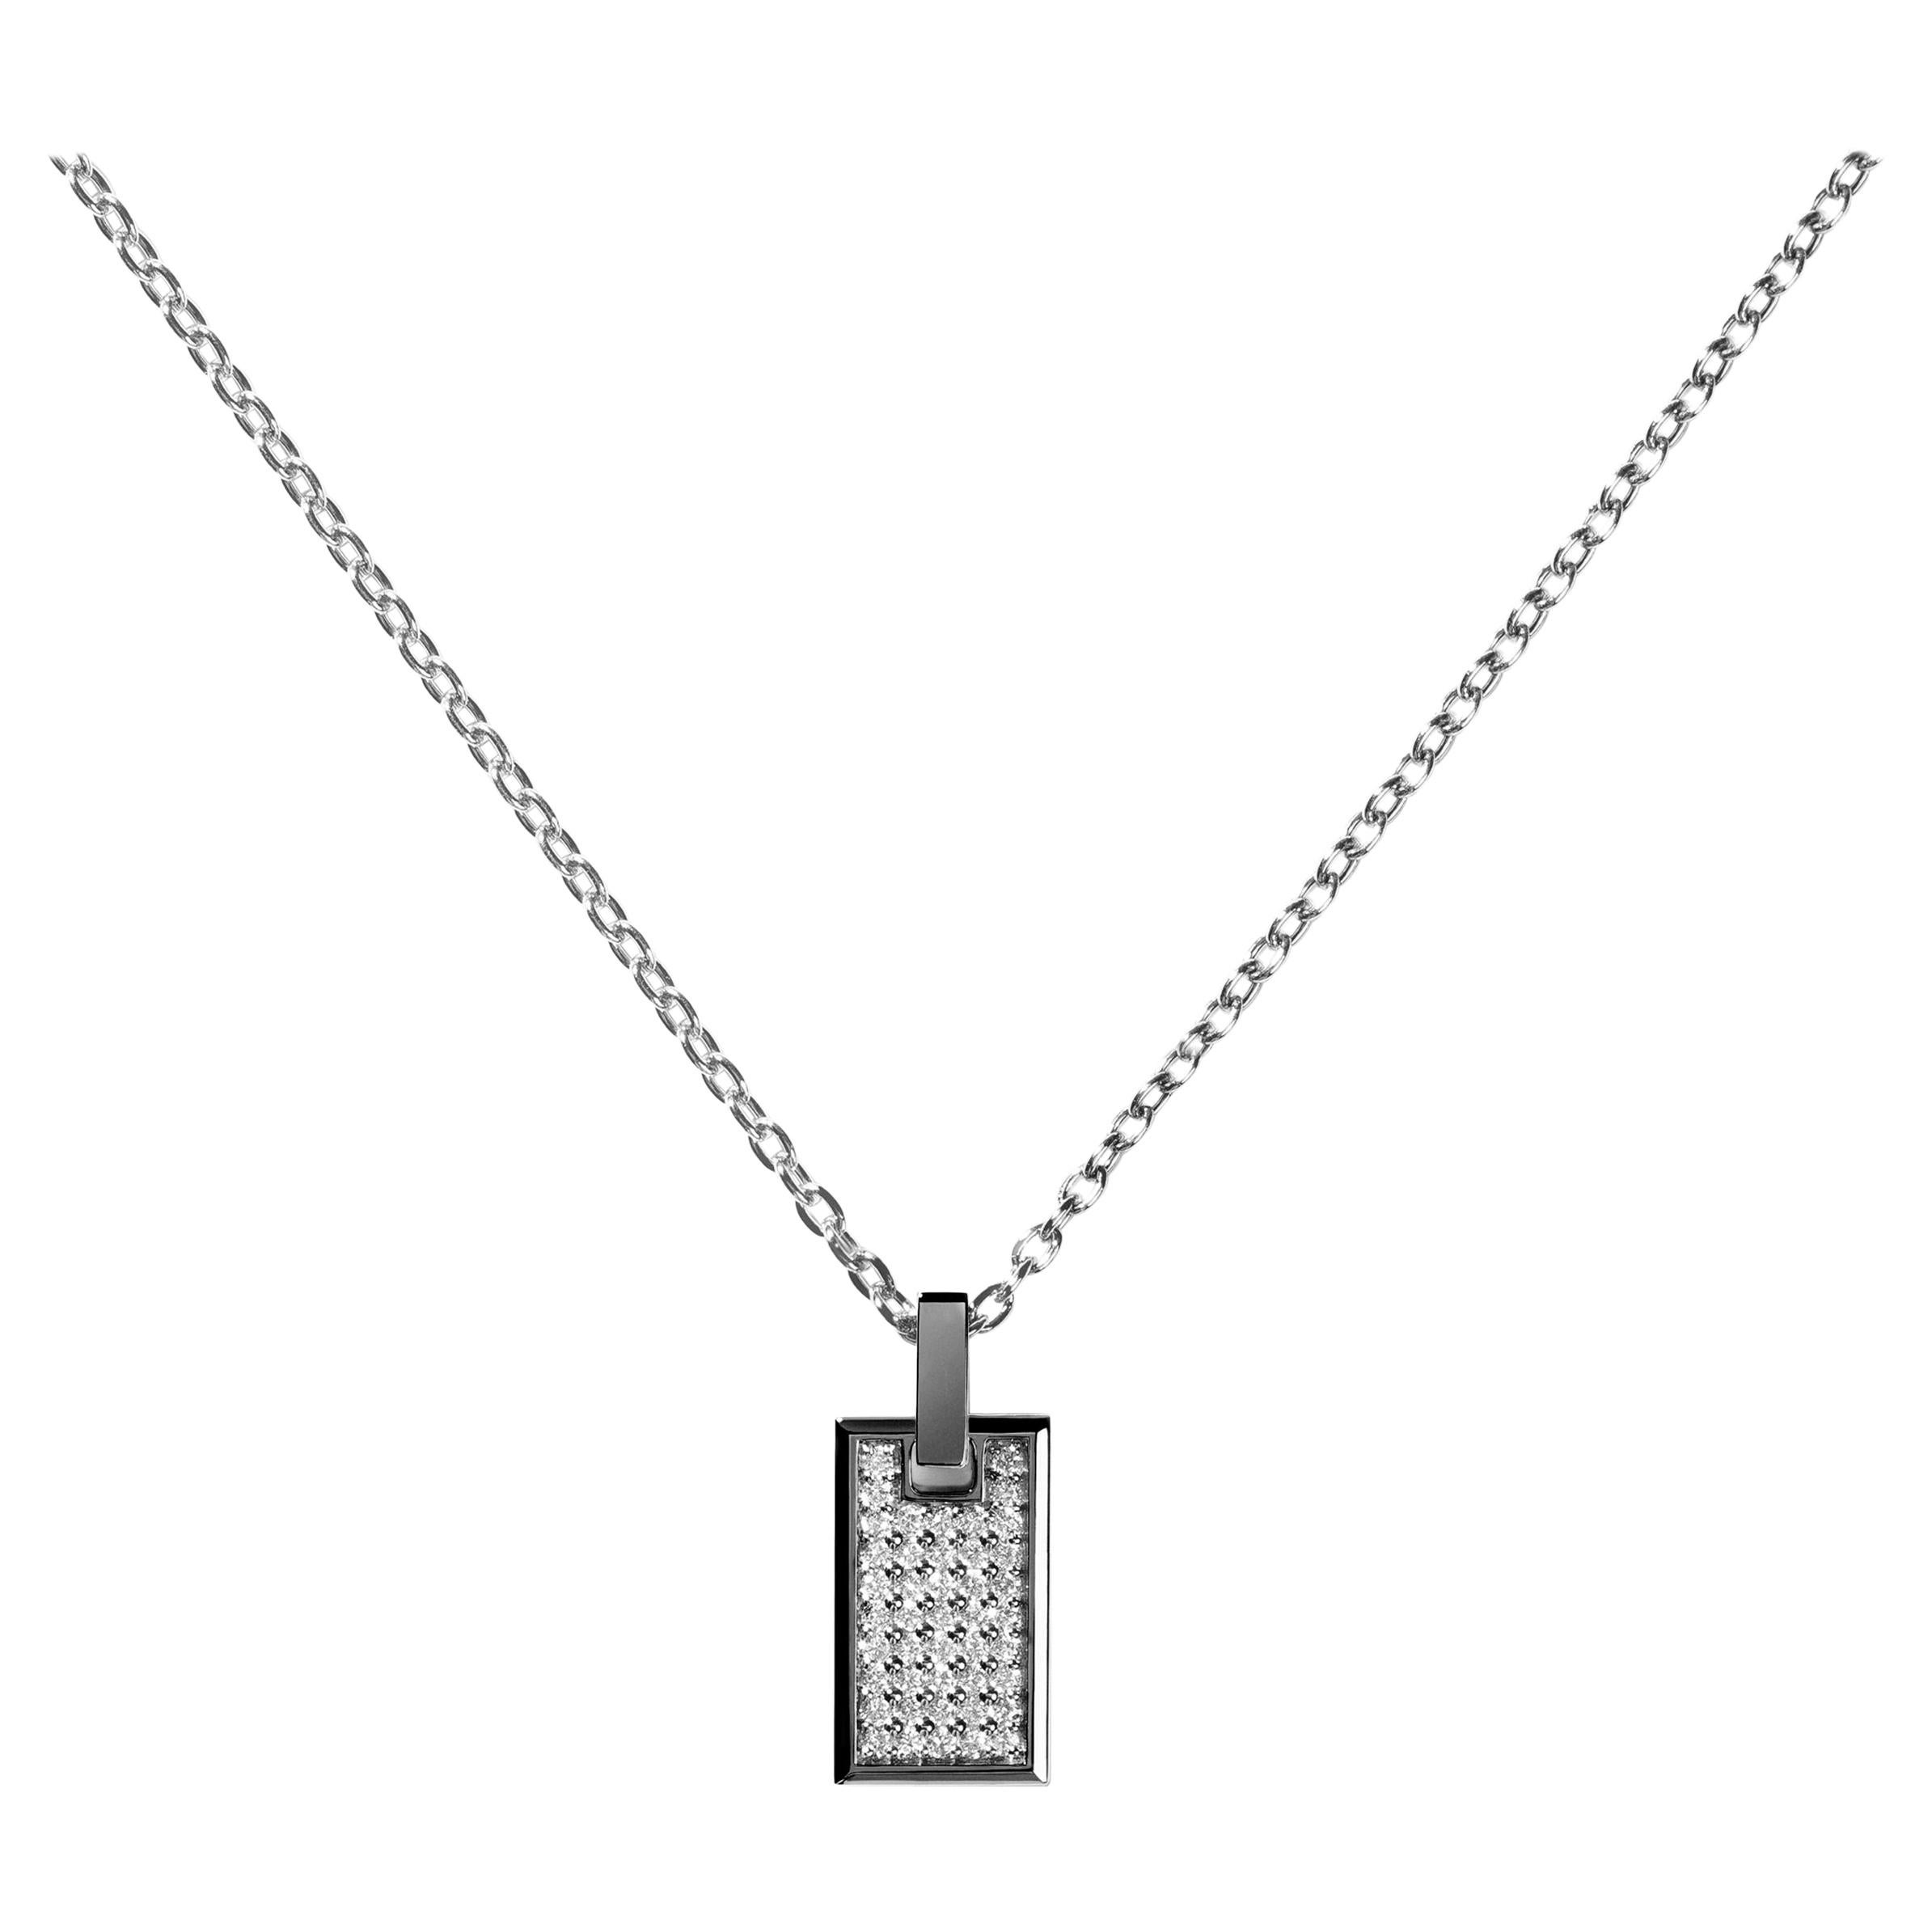 AS29 Small Pave Diamond Lock Necklace in 18k Black Gold For Sale at 1stDibs